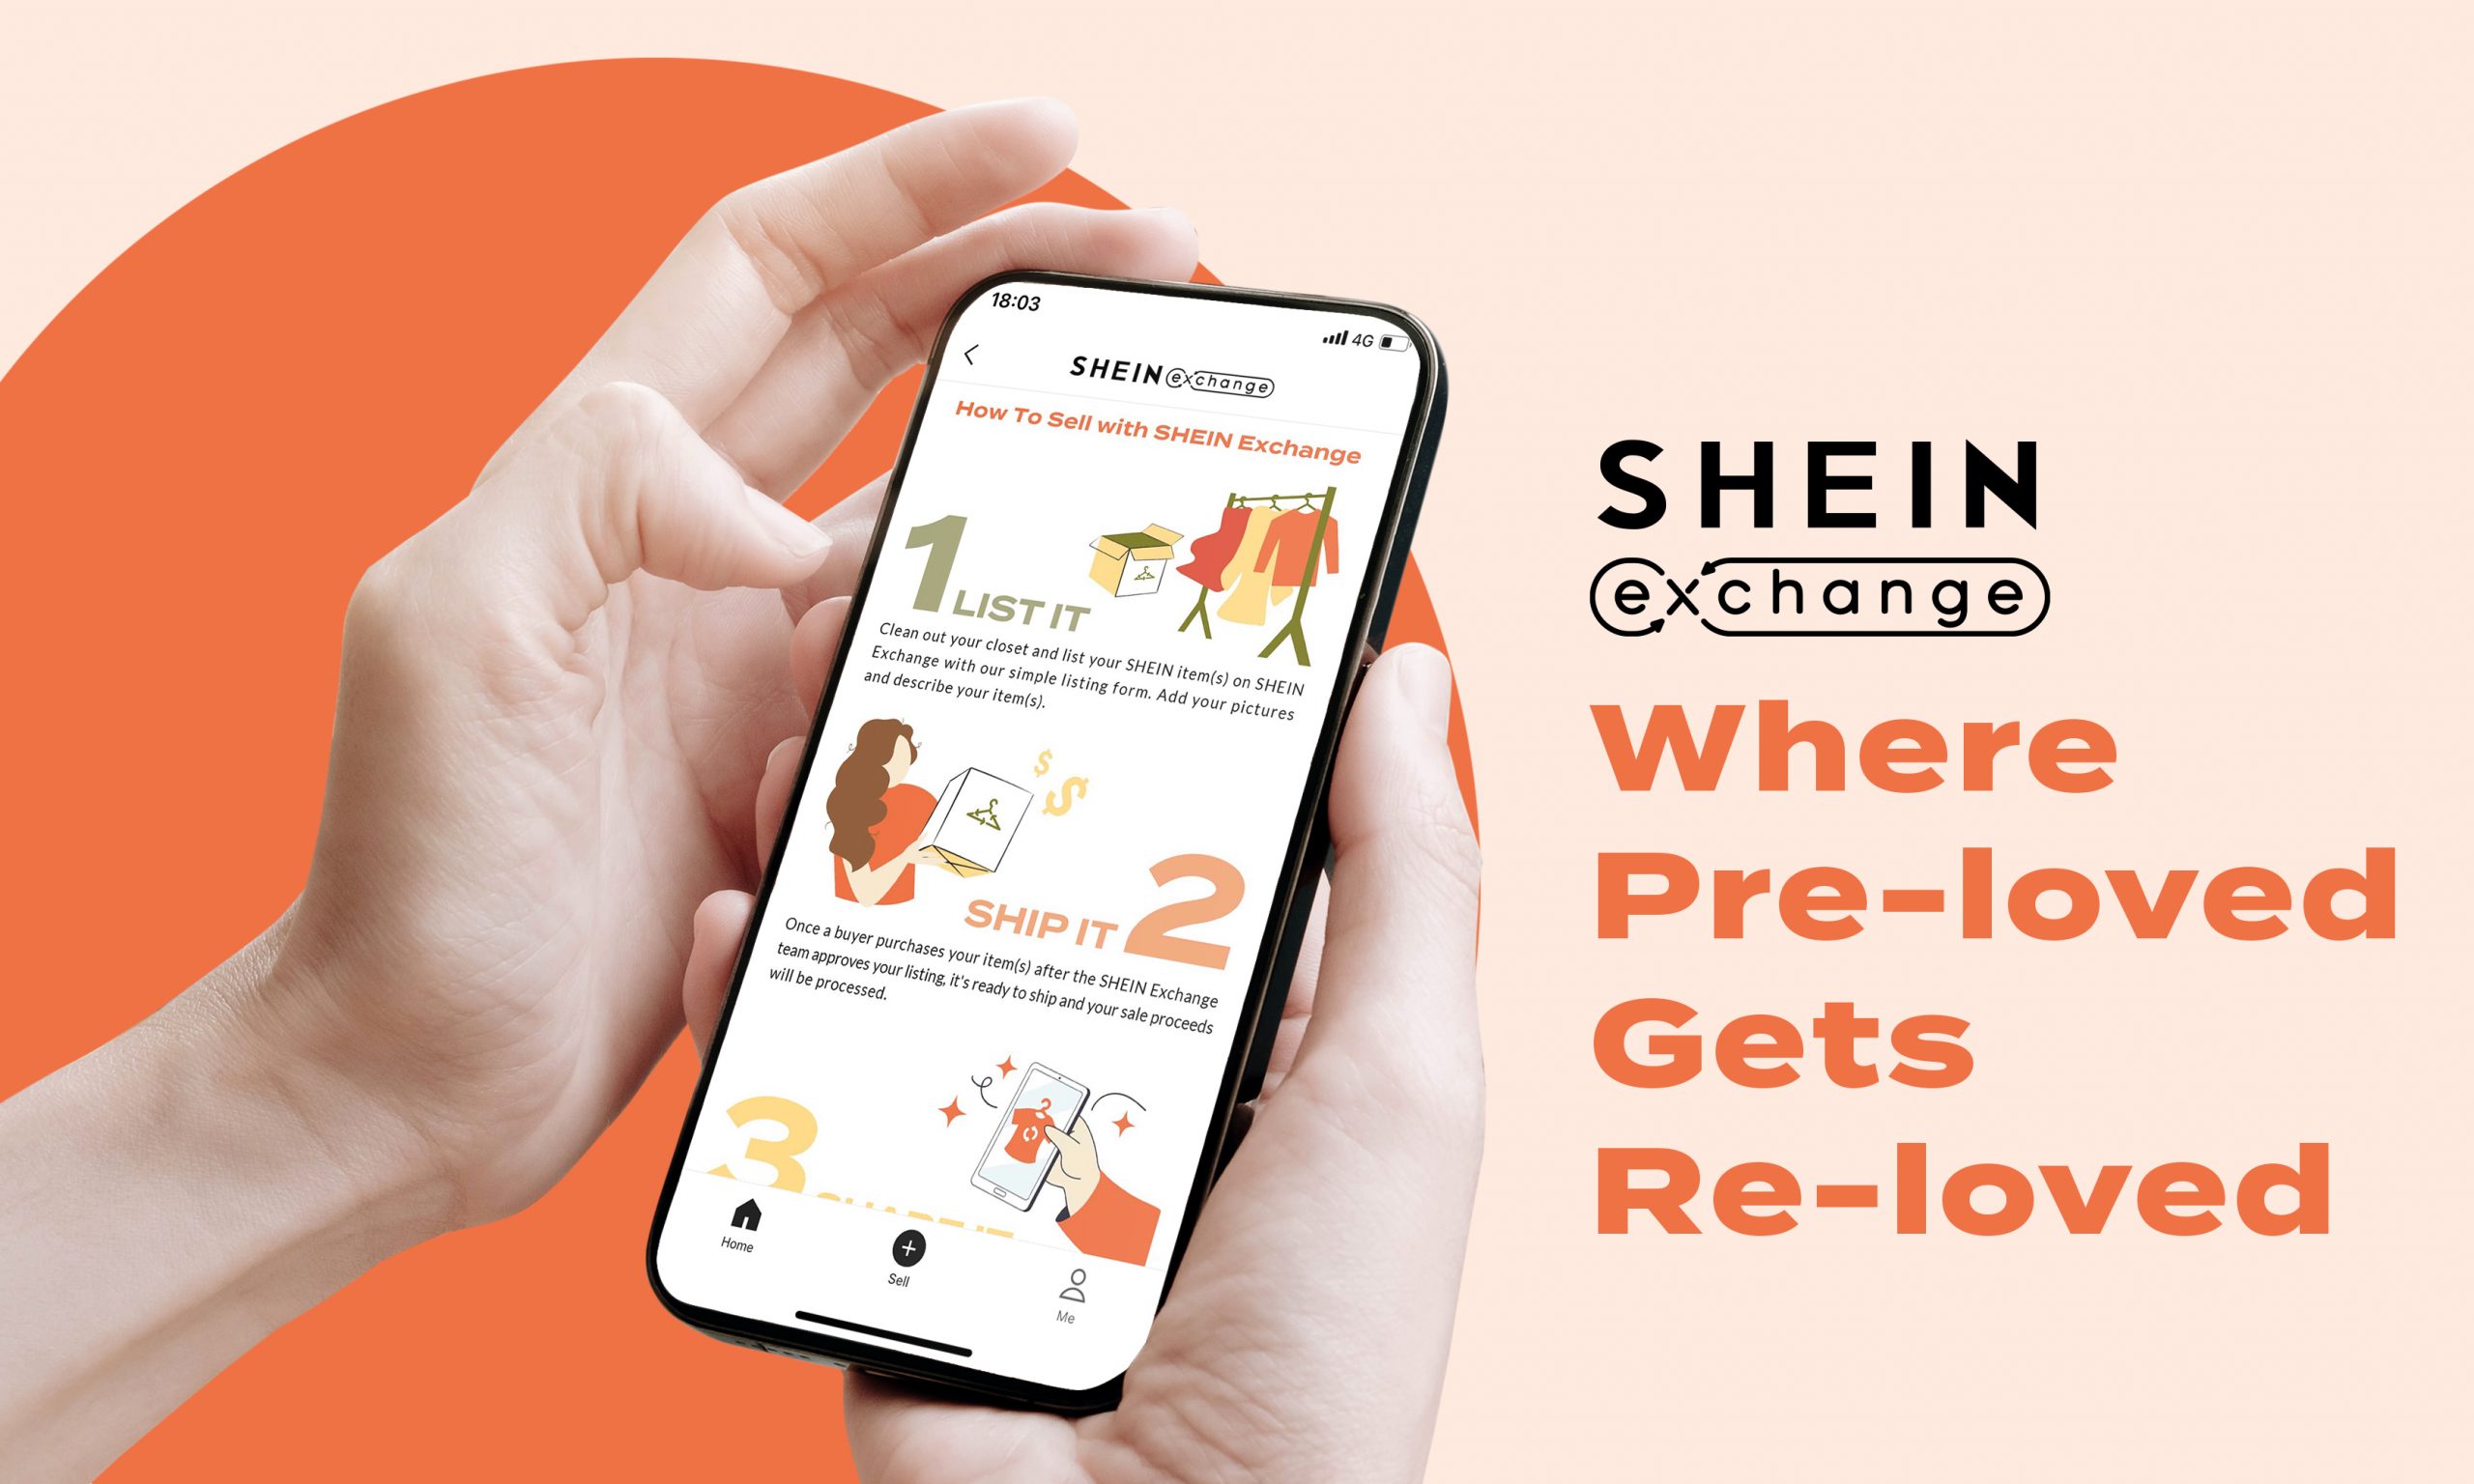 You are currently viewing SHEIN Builds New Community Destination Through SHEIN Exchange Resale Platform